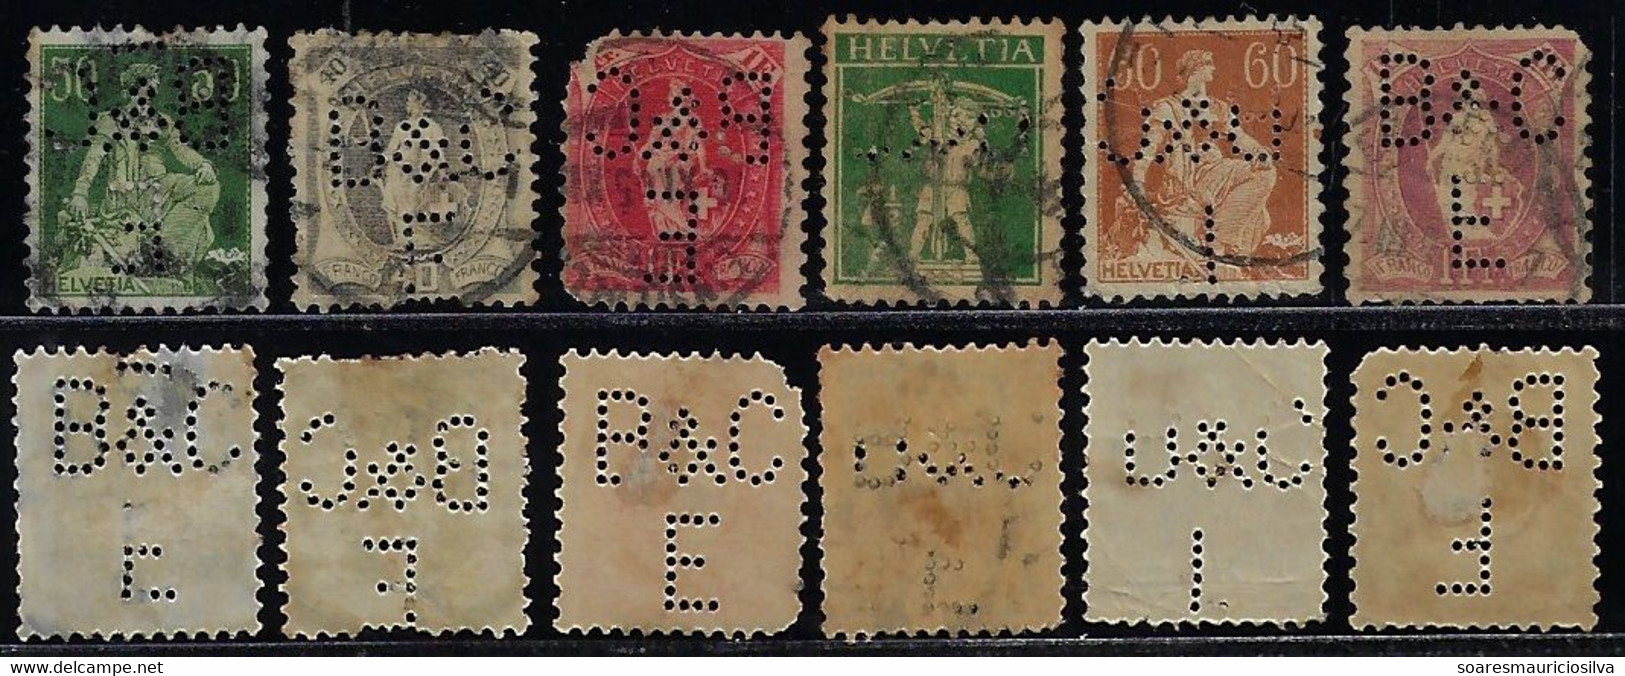 Switzerland 1886 / 1947 6 Stamp With Perfin B&C/E By Benziger & Co AG Publishing House From Einsiedeln Lochung Perfore - Perforadas